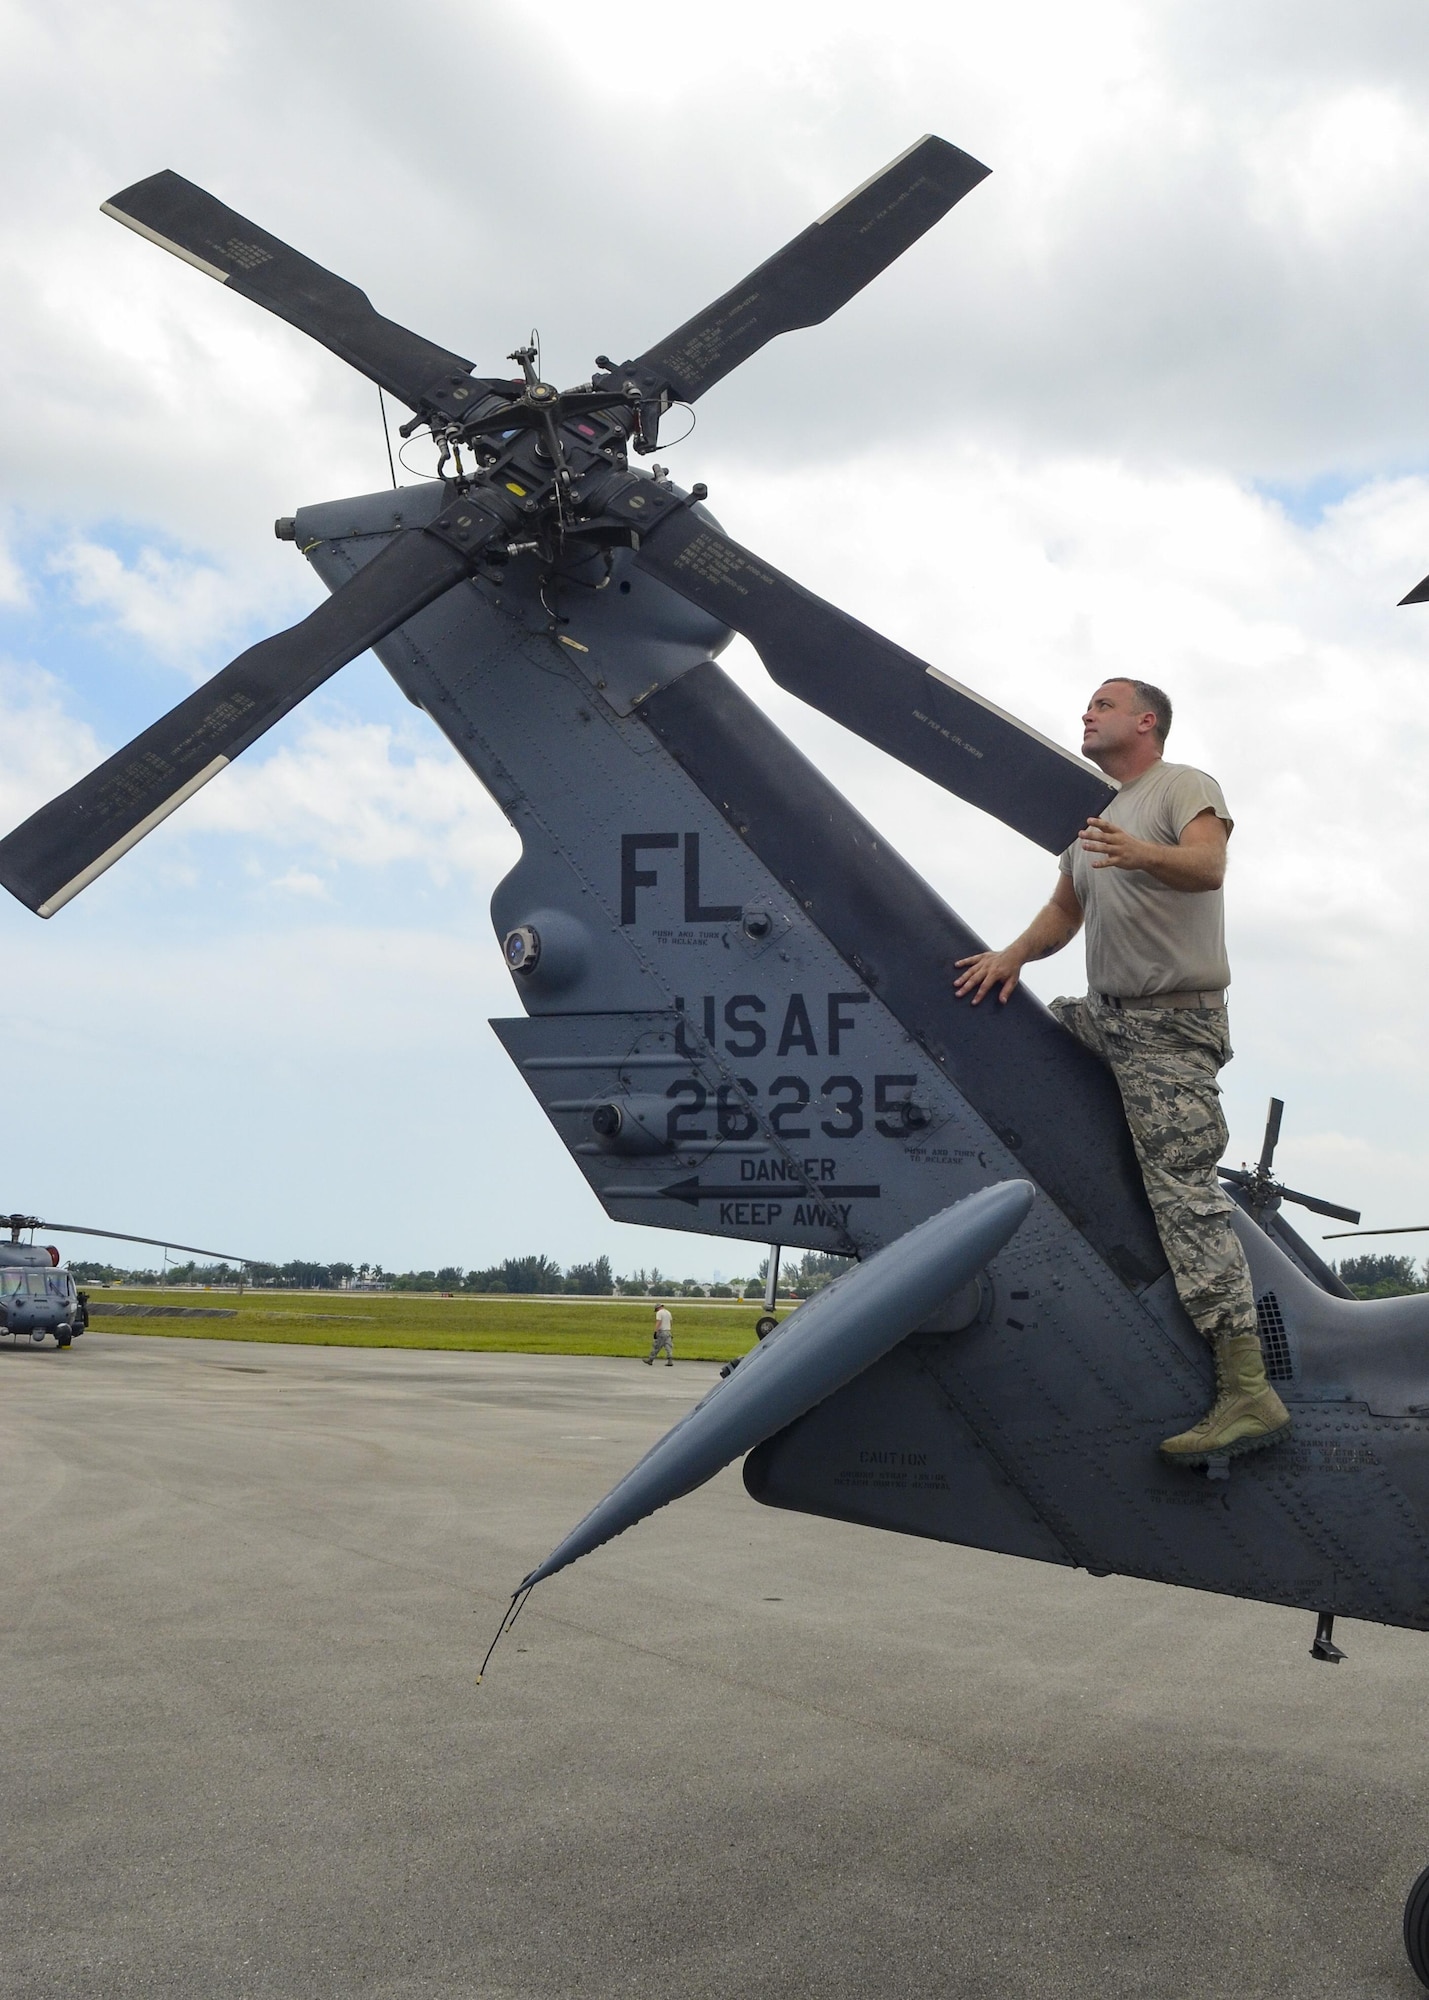 Staff Sgt. Nathan Weiss, crew chief from the 920th Rescue Wing, works on an HH-60G Pave Hawk helicopter near Miami Beach during the National Salute to America’s Heroes Air and Sea Show media day May 26, 2017. Top tier U.S. military assets have assembled in Miami to showcase air superiority while honoring those who have made the ultimate sacrifice during the Memorial Day weekend. The 920th Rescue Wing, the Air Force Reserve’s only rescue wing, will headline the airshow by demonstrating combat-search-and-rescue capabilities by teaming up with a HC-130P/N Combat King and four A-10 Thunderbolt II aircraft. (U.S. Air Force photo by Senior Airman Brandon Kalloo Sanes)